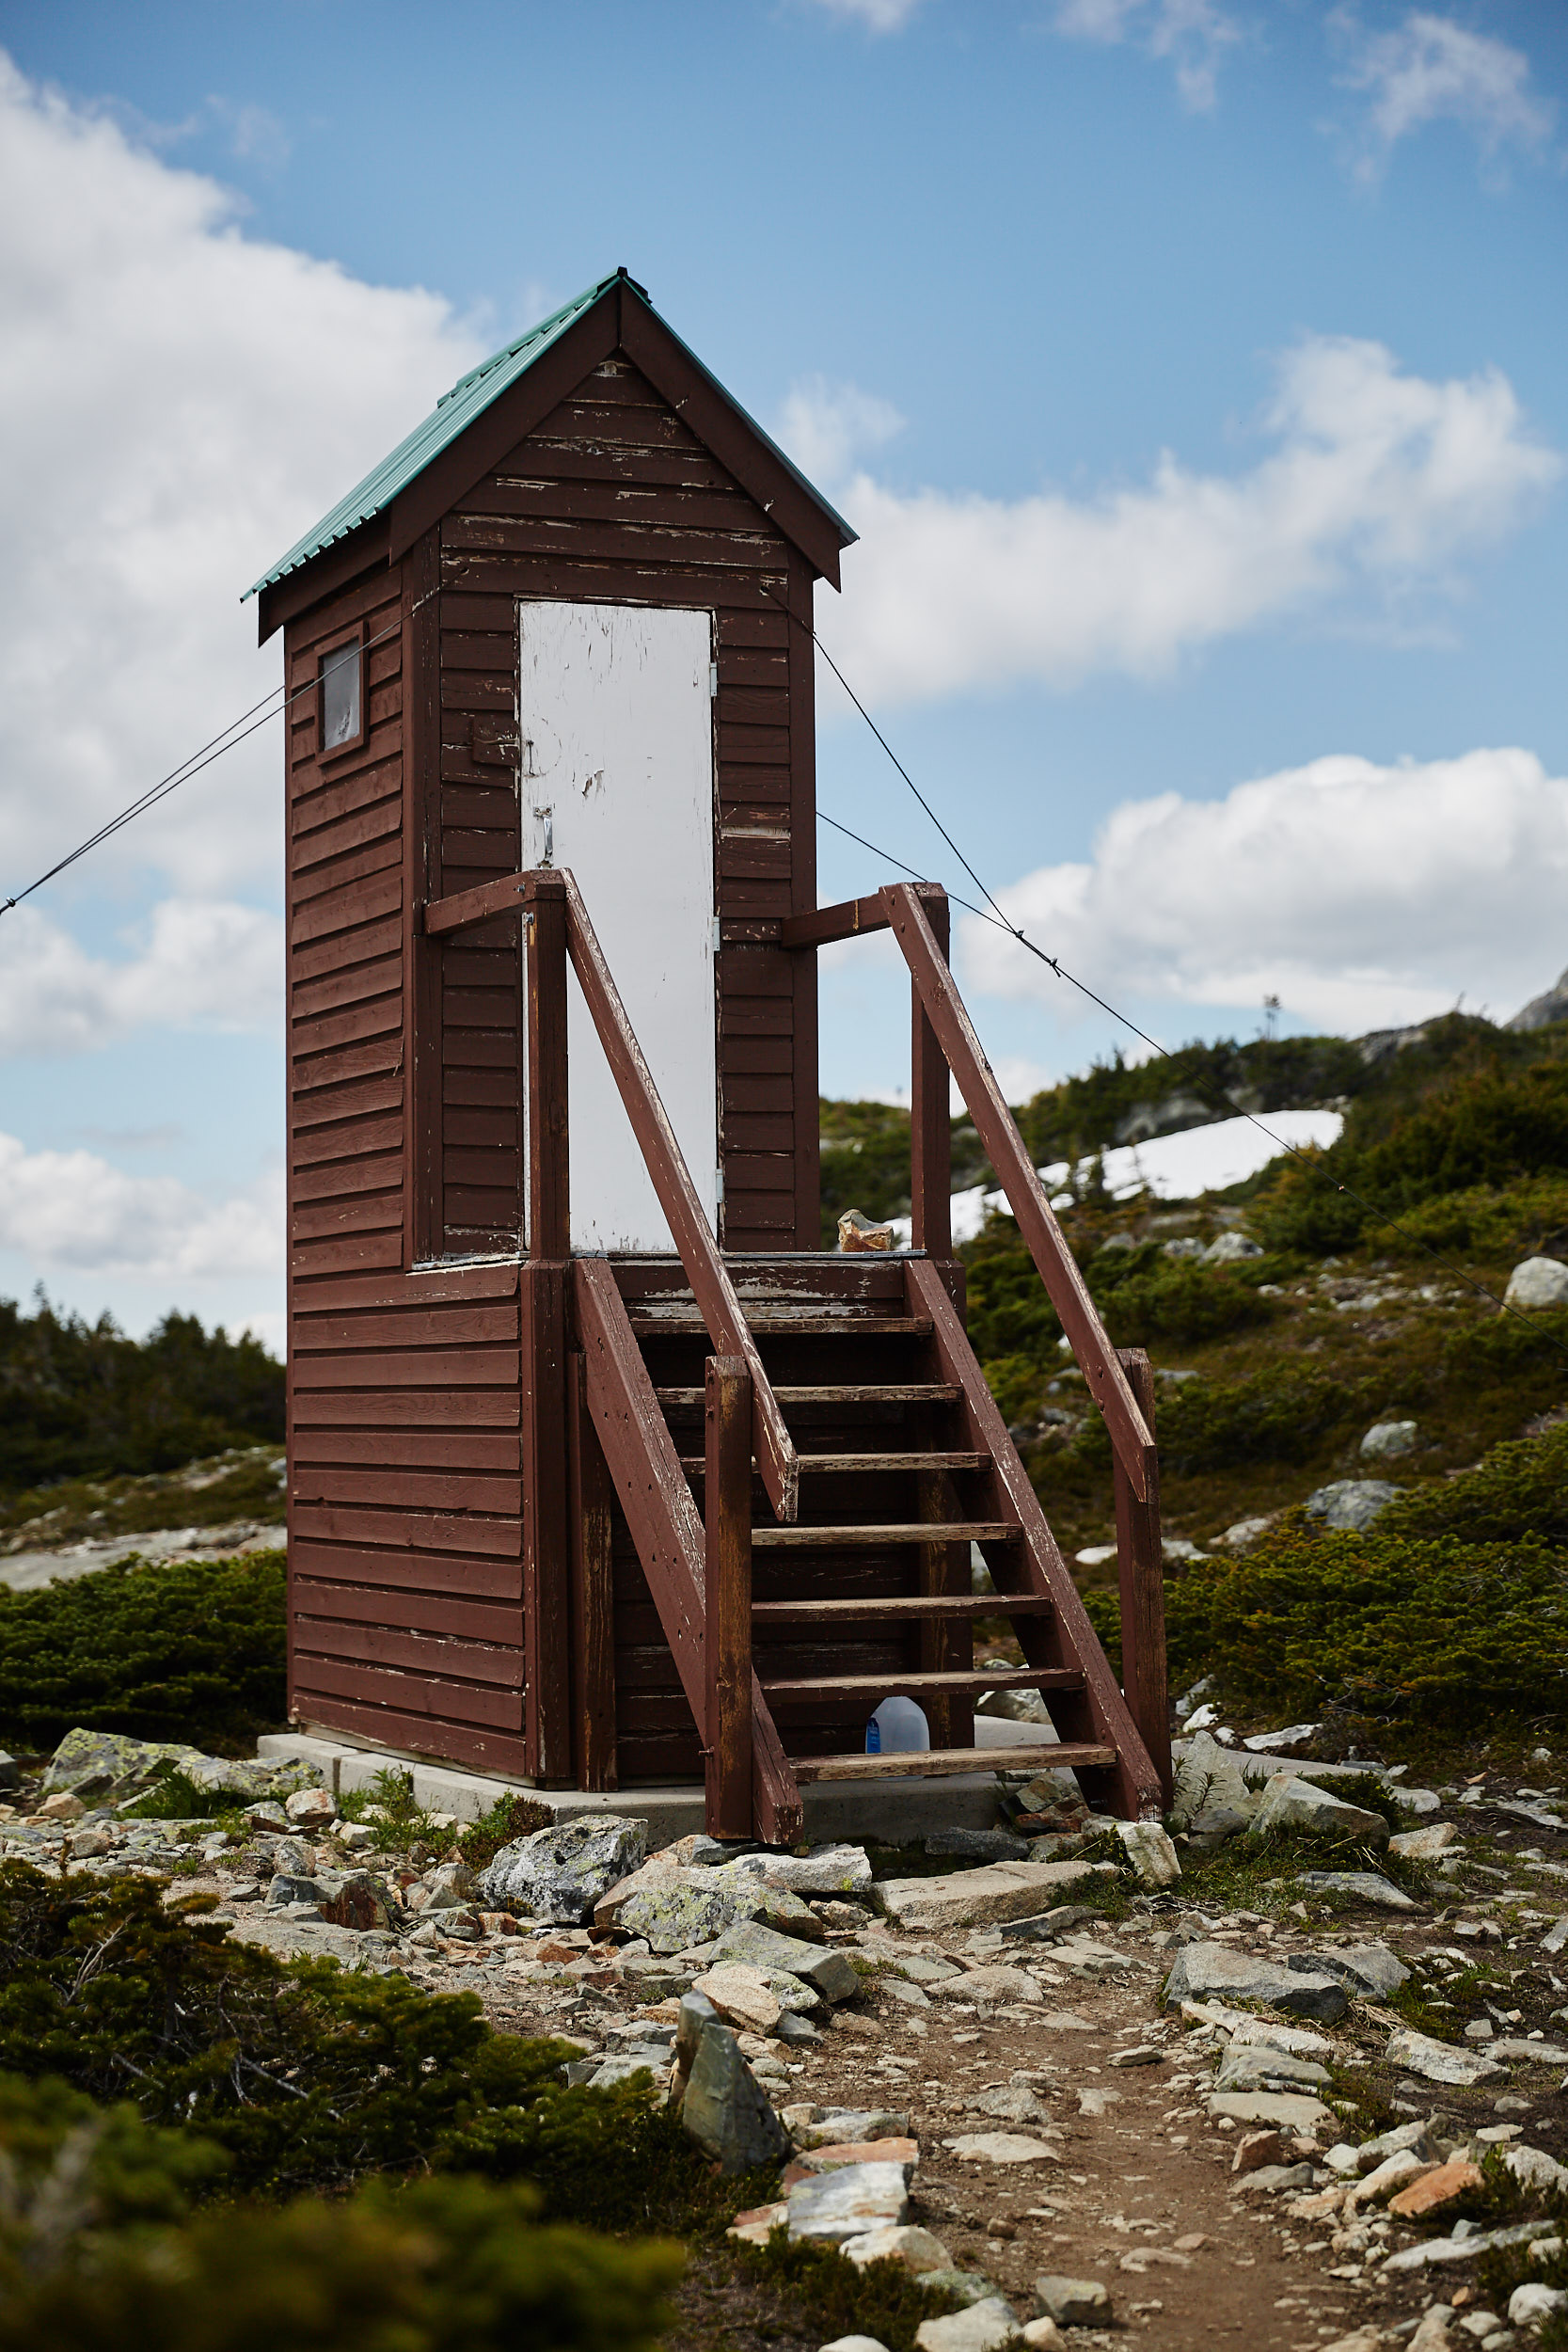  There is a nice outhouse close by the lake and hut. 